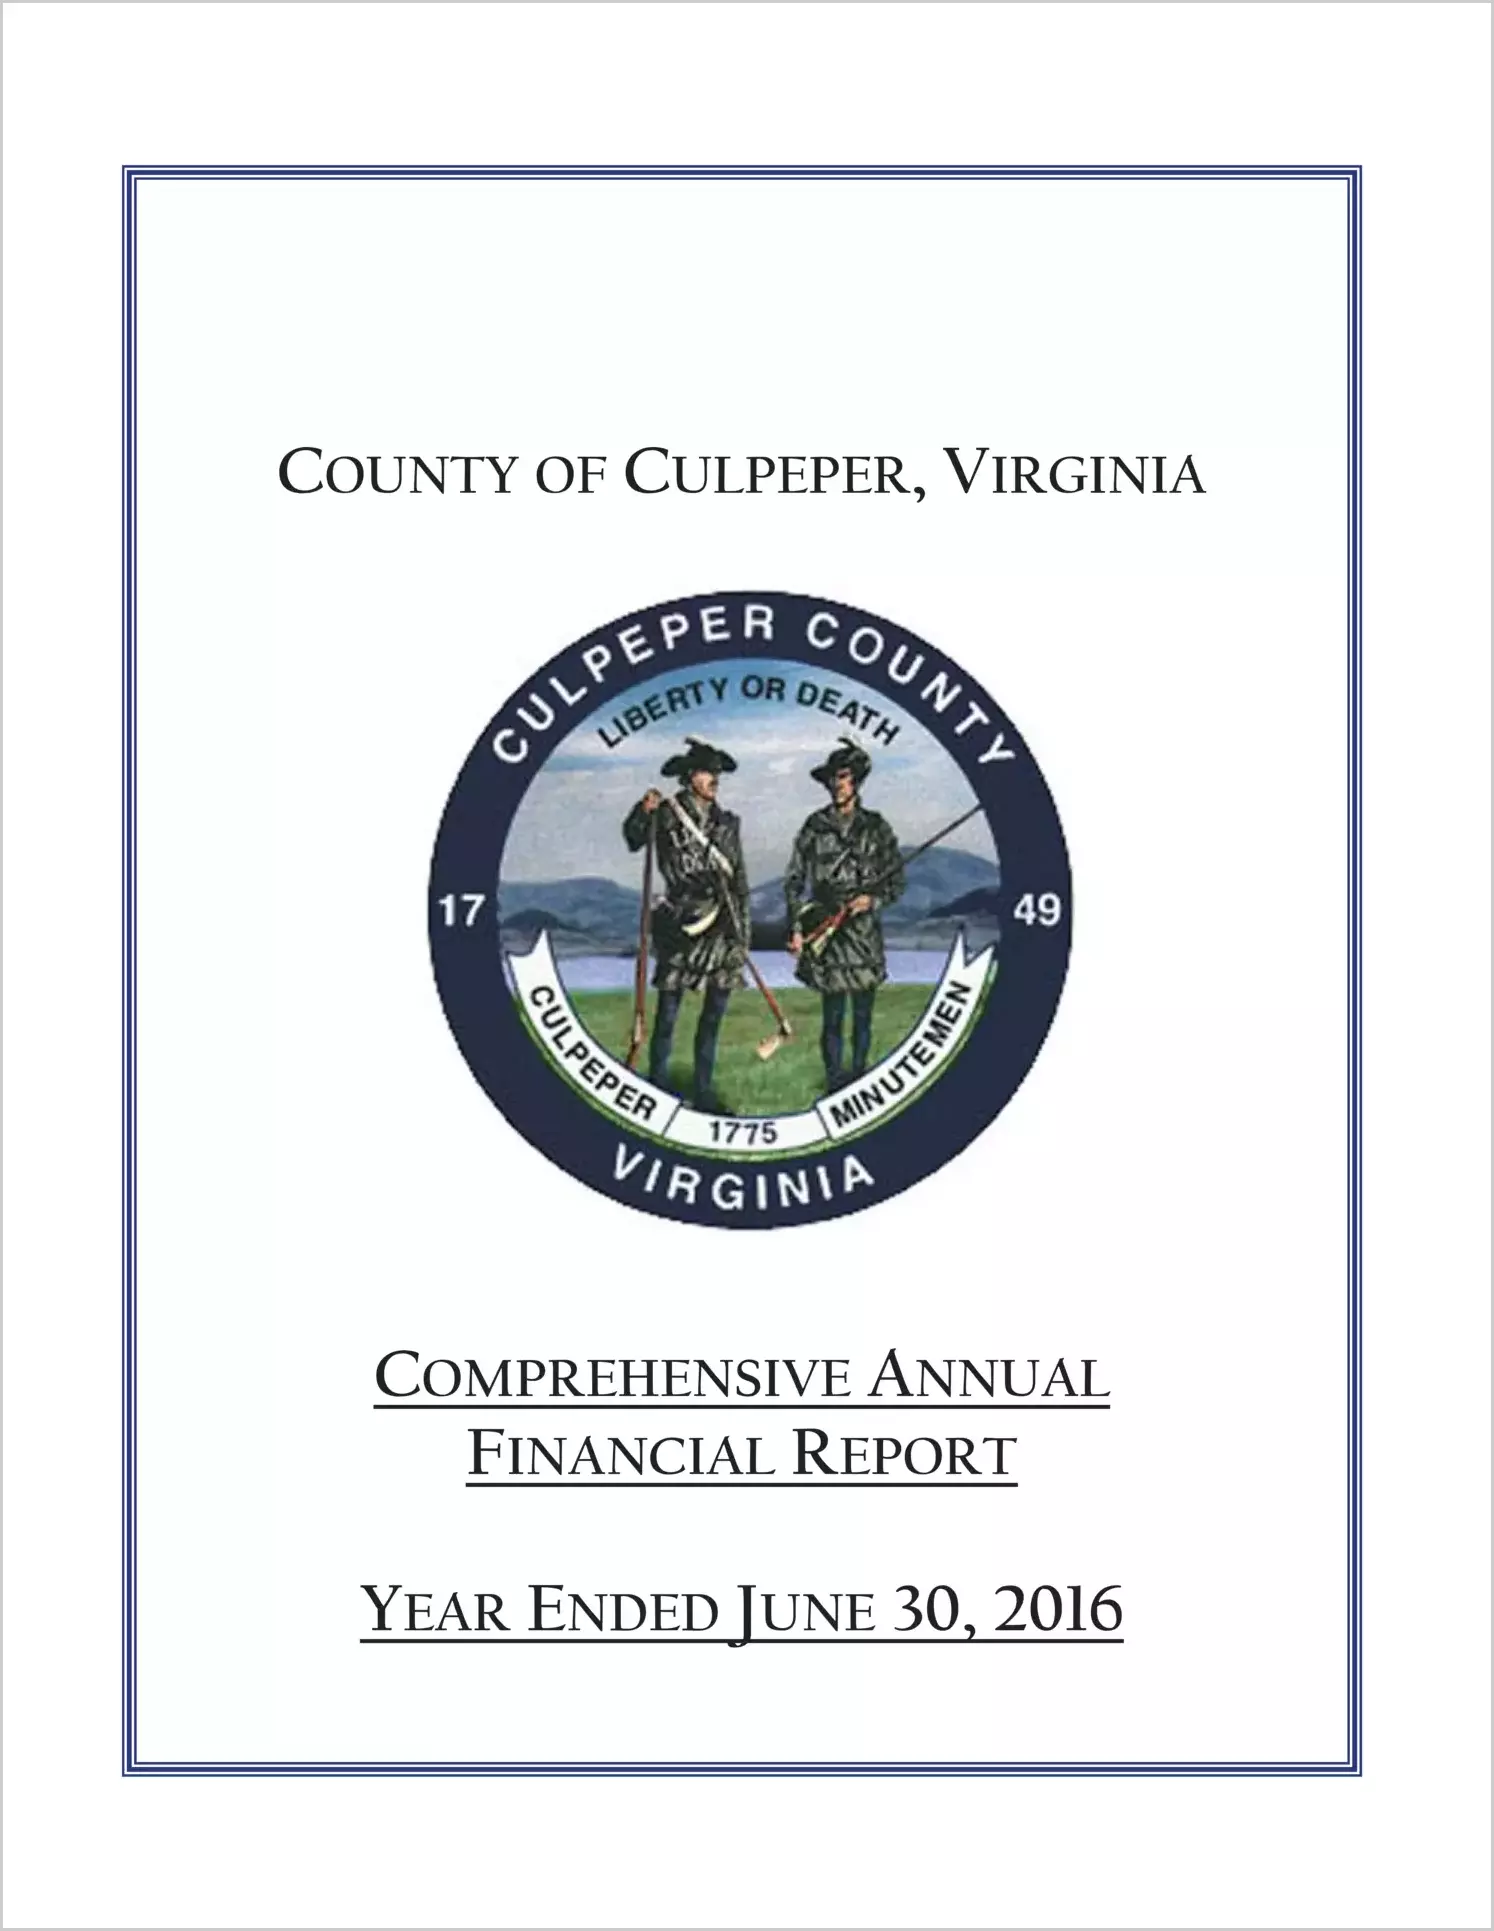 2016 Annual Financial Report for County of Culpeper